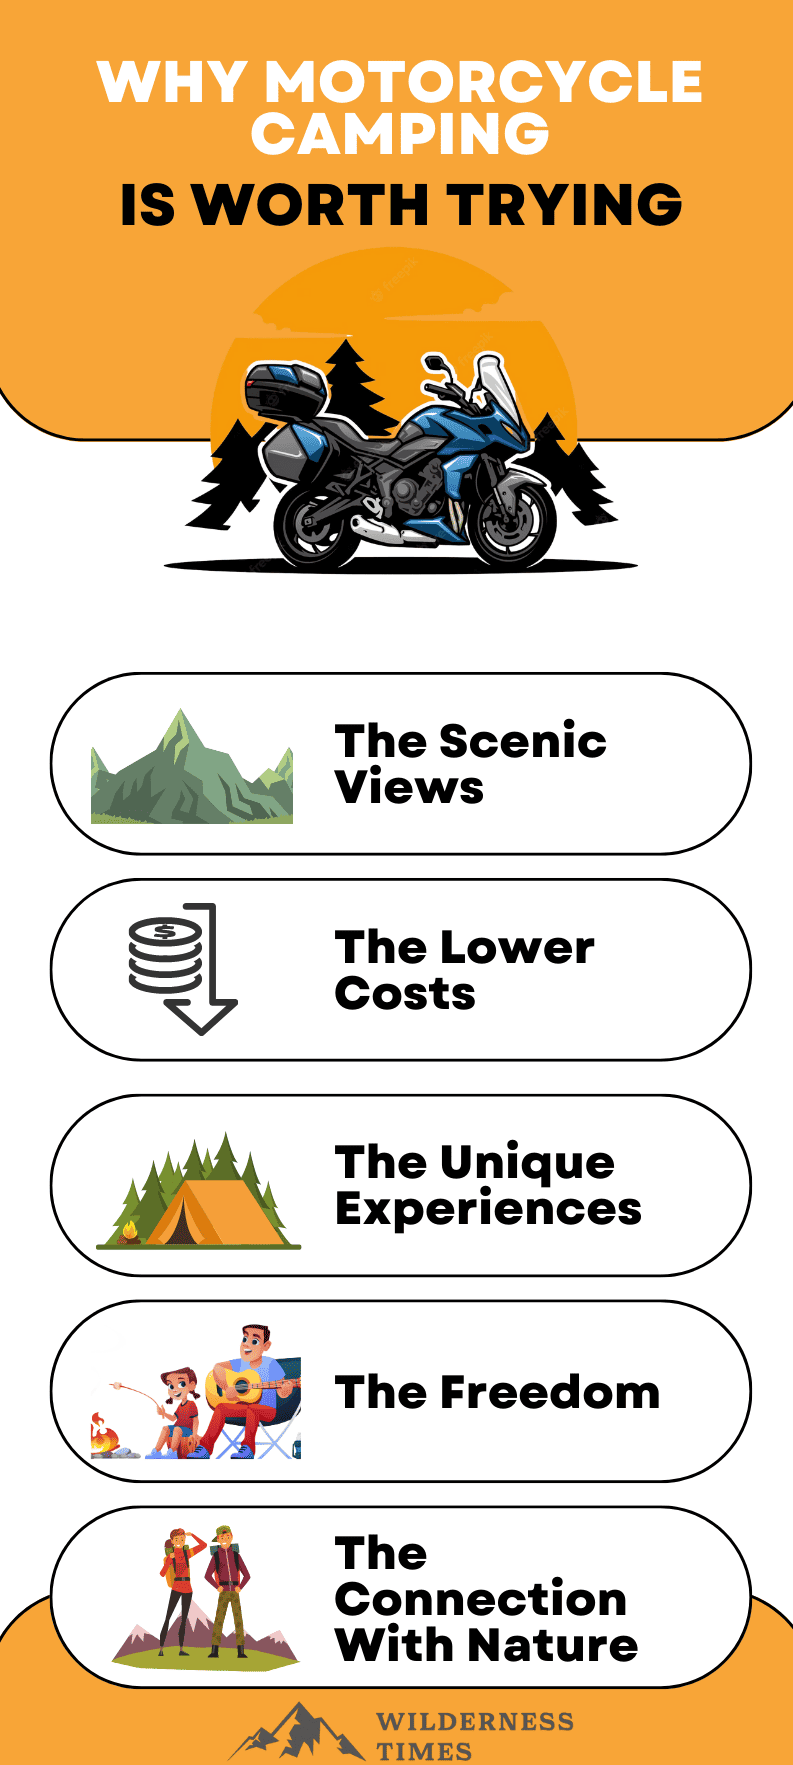 Why Motorcycle Camping Is Worth Trying